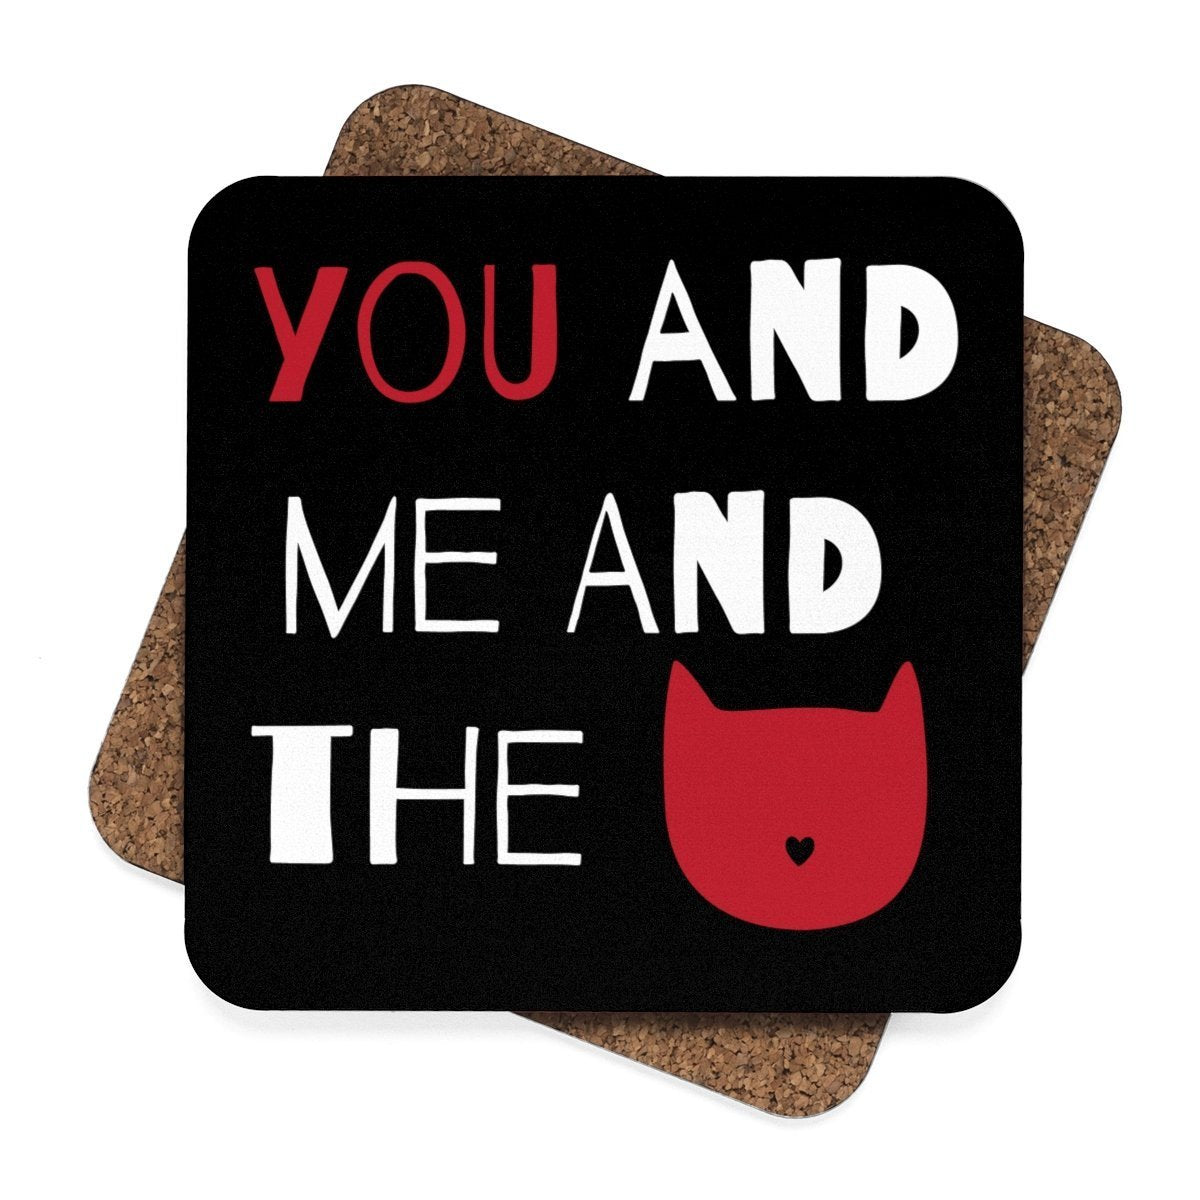 Cute cat decorations for home, You and Me and the Cat Coasters Set - 4pcs